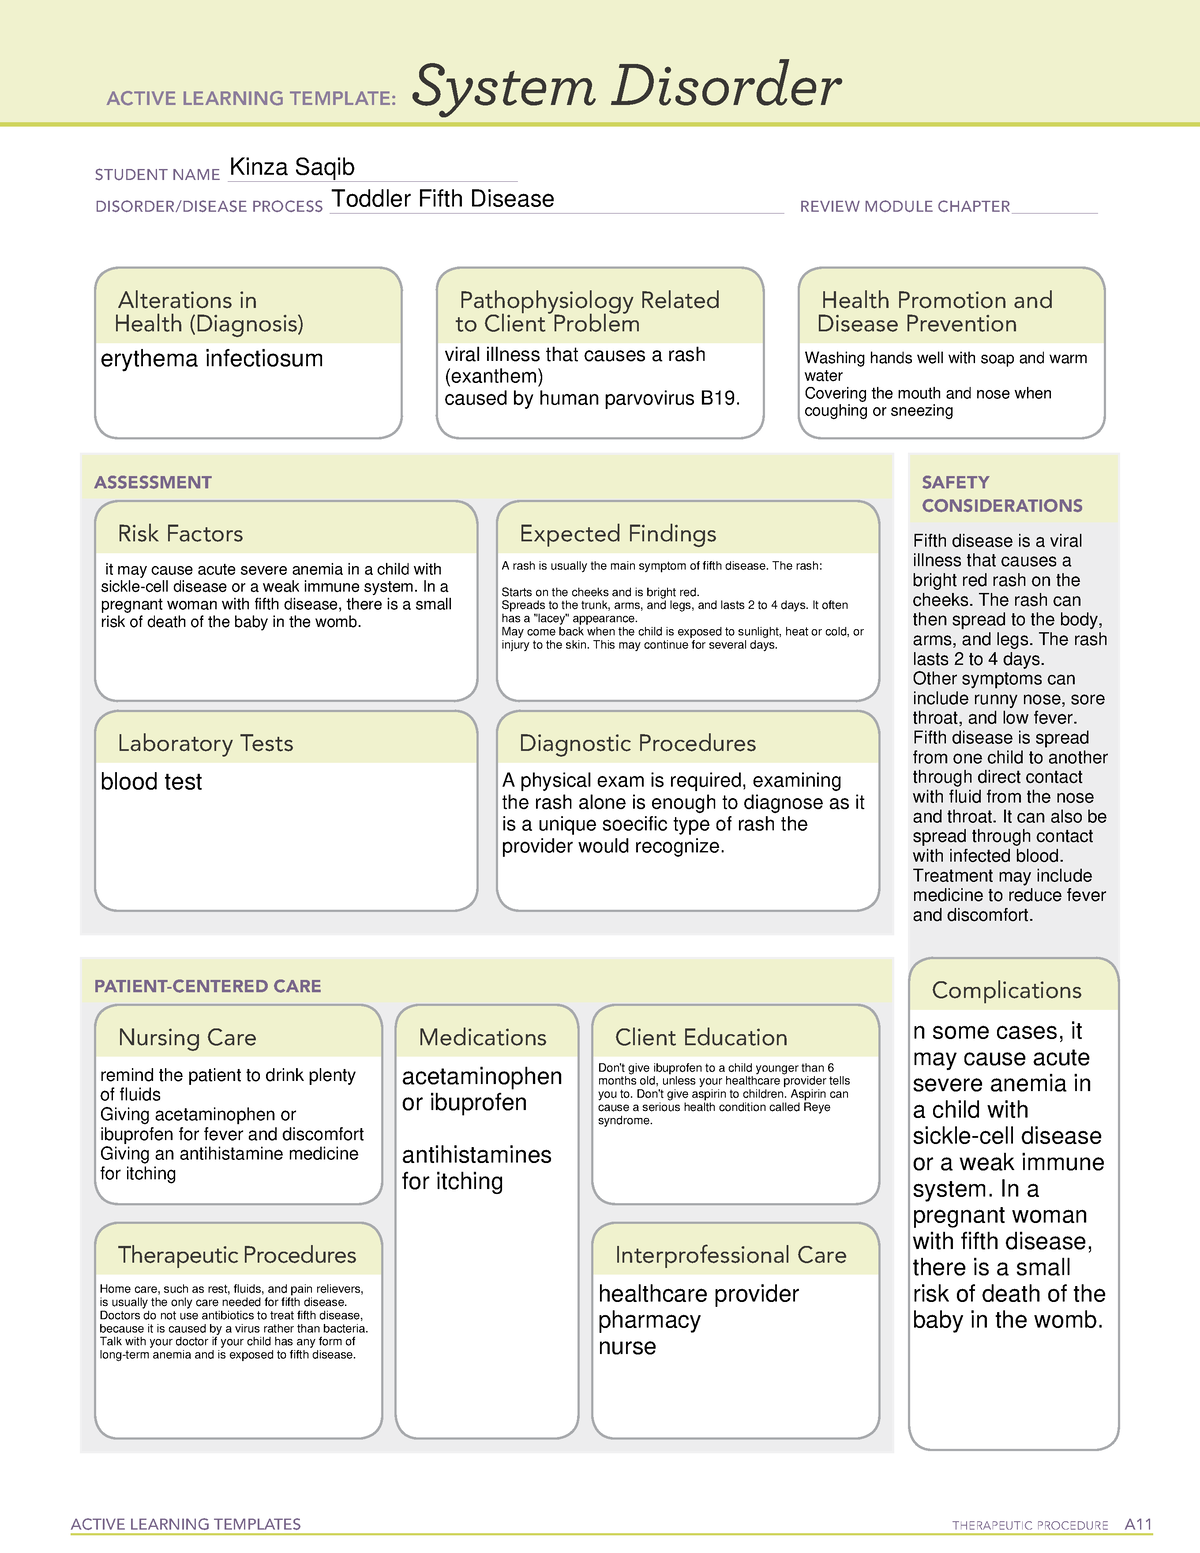 Fifth disease template systems disorder ACTIVE LEARNING TEMPLATES